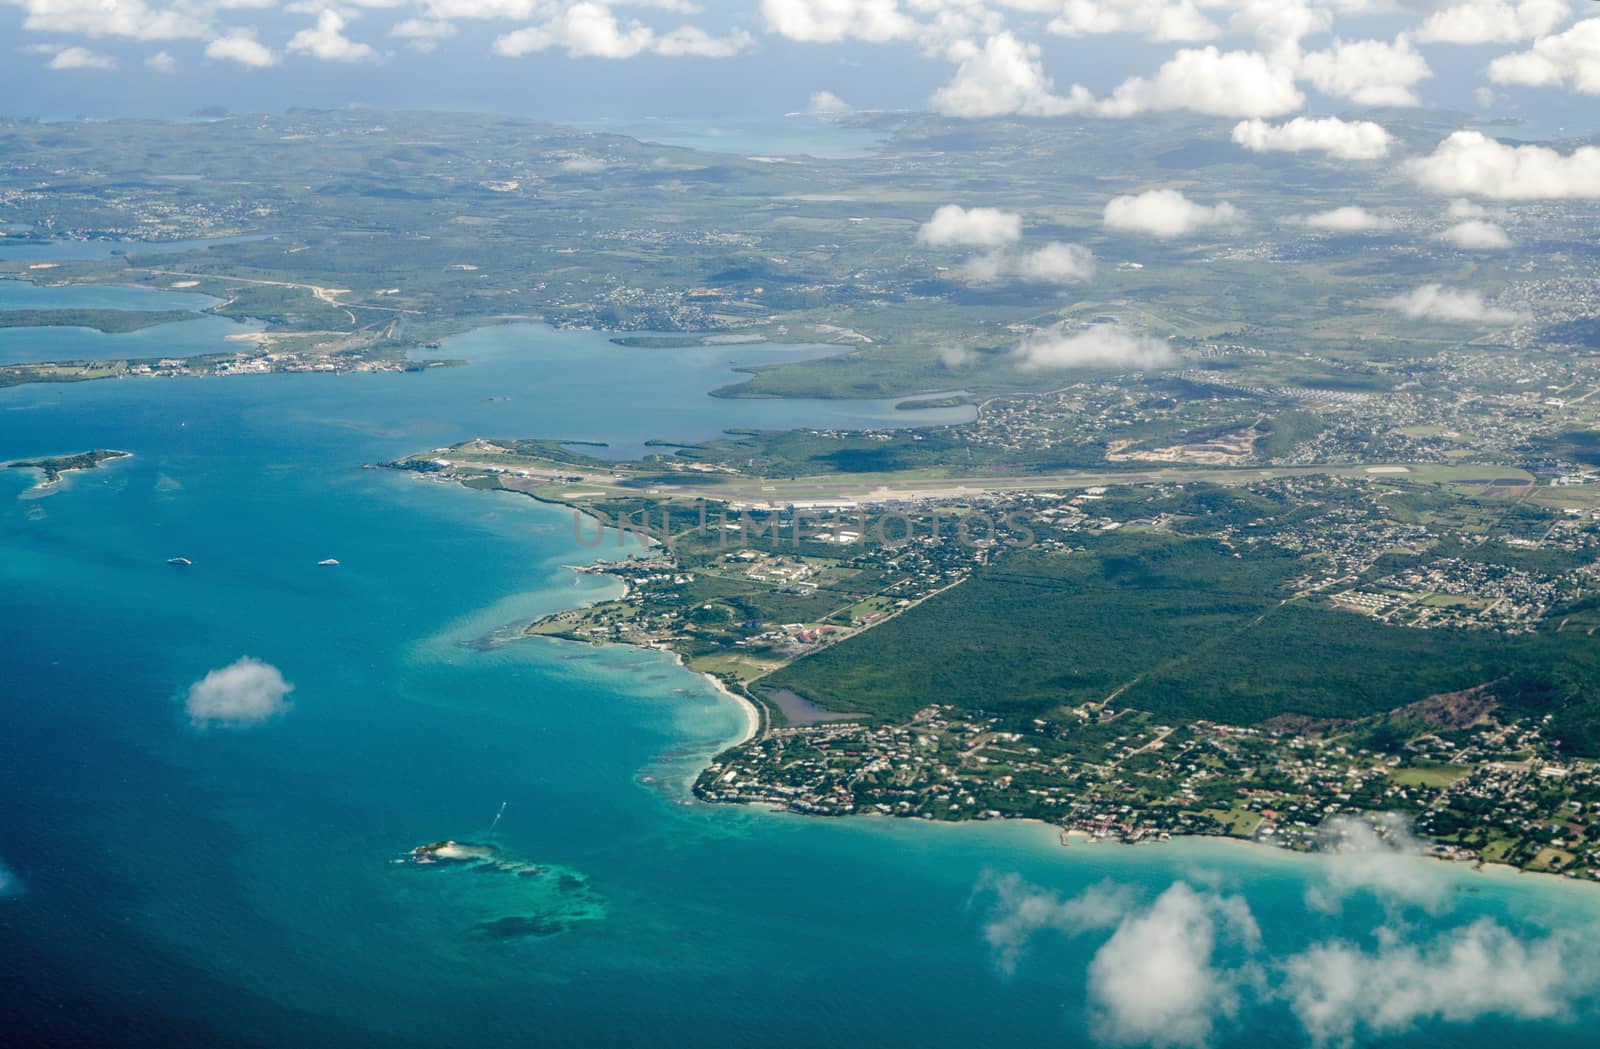 Aerial view of V.C. Bird International Airport, Cedar Grove, Osborn, Judge's Bay and Judge's Hill on the north coast of Antigua in the Caribbean.